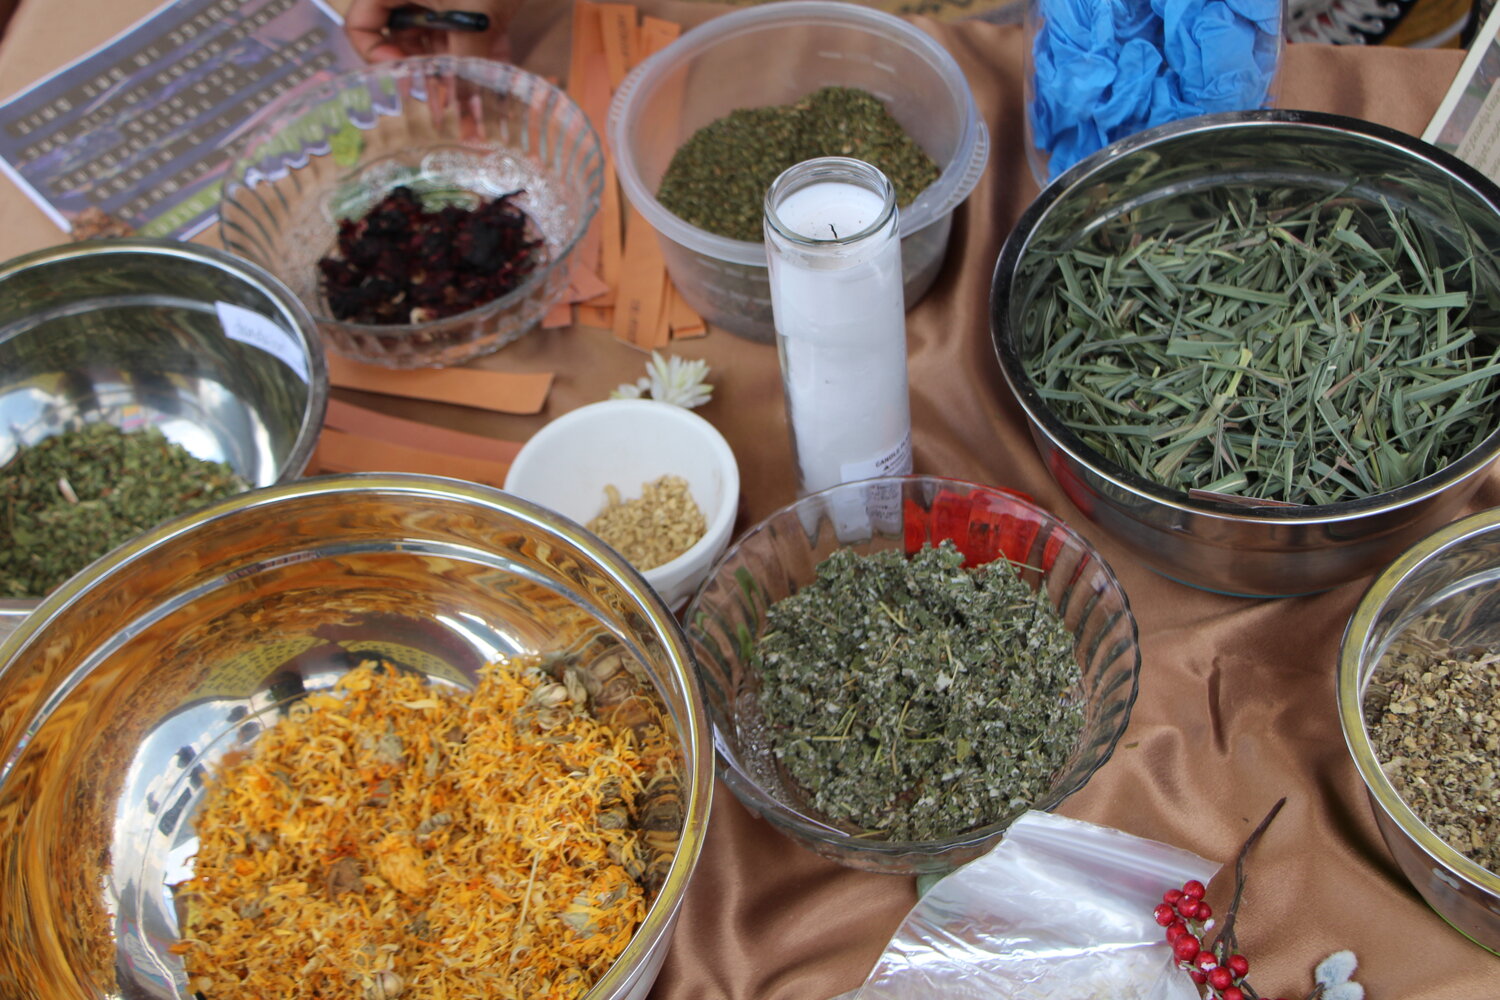 Jemeli Apothecary sells tea and herbs at the Soul of the Southside festival on Monday, June 19.